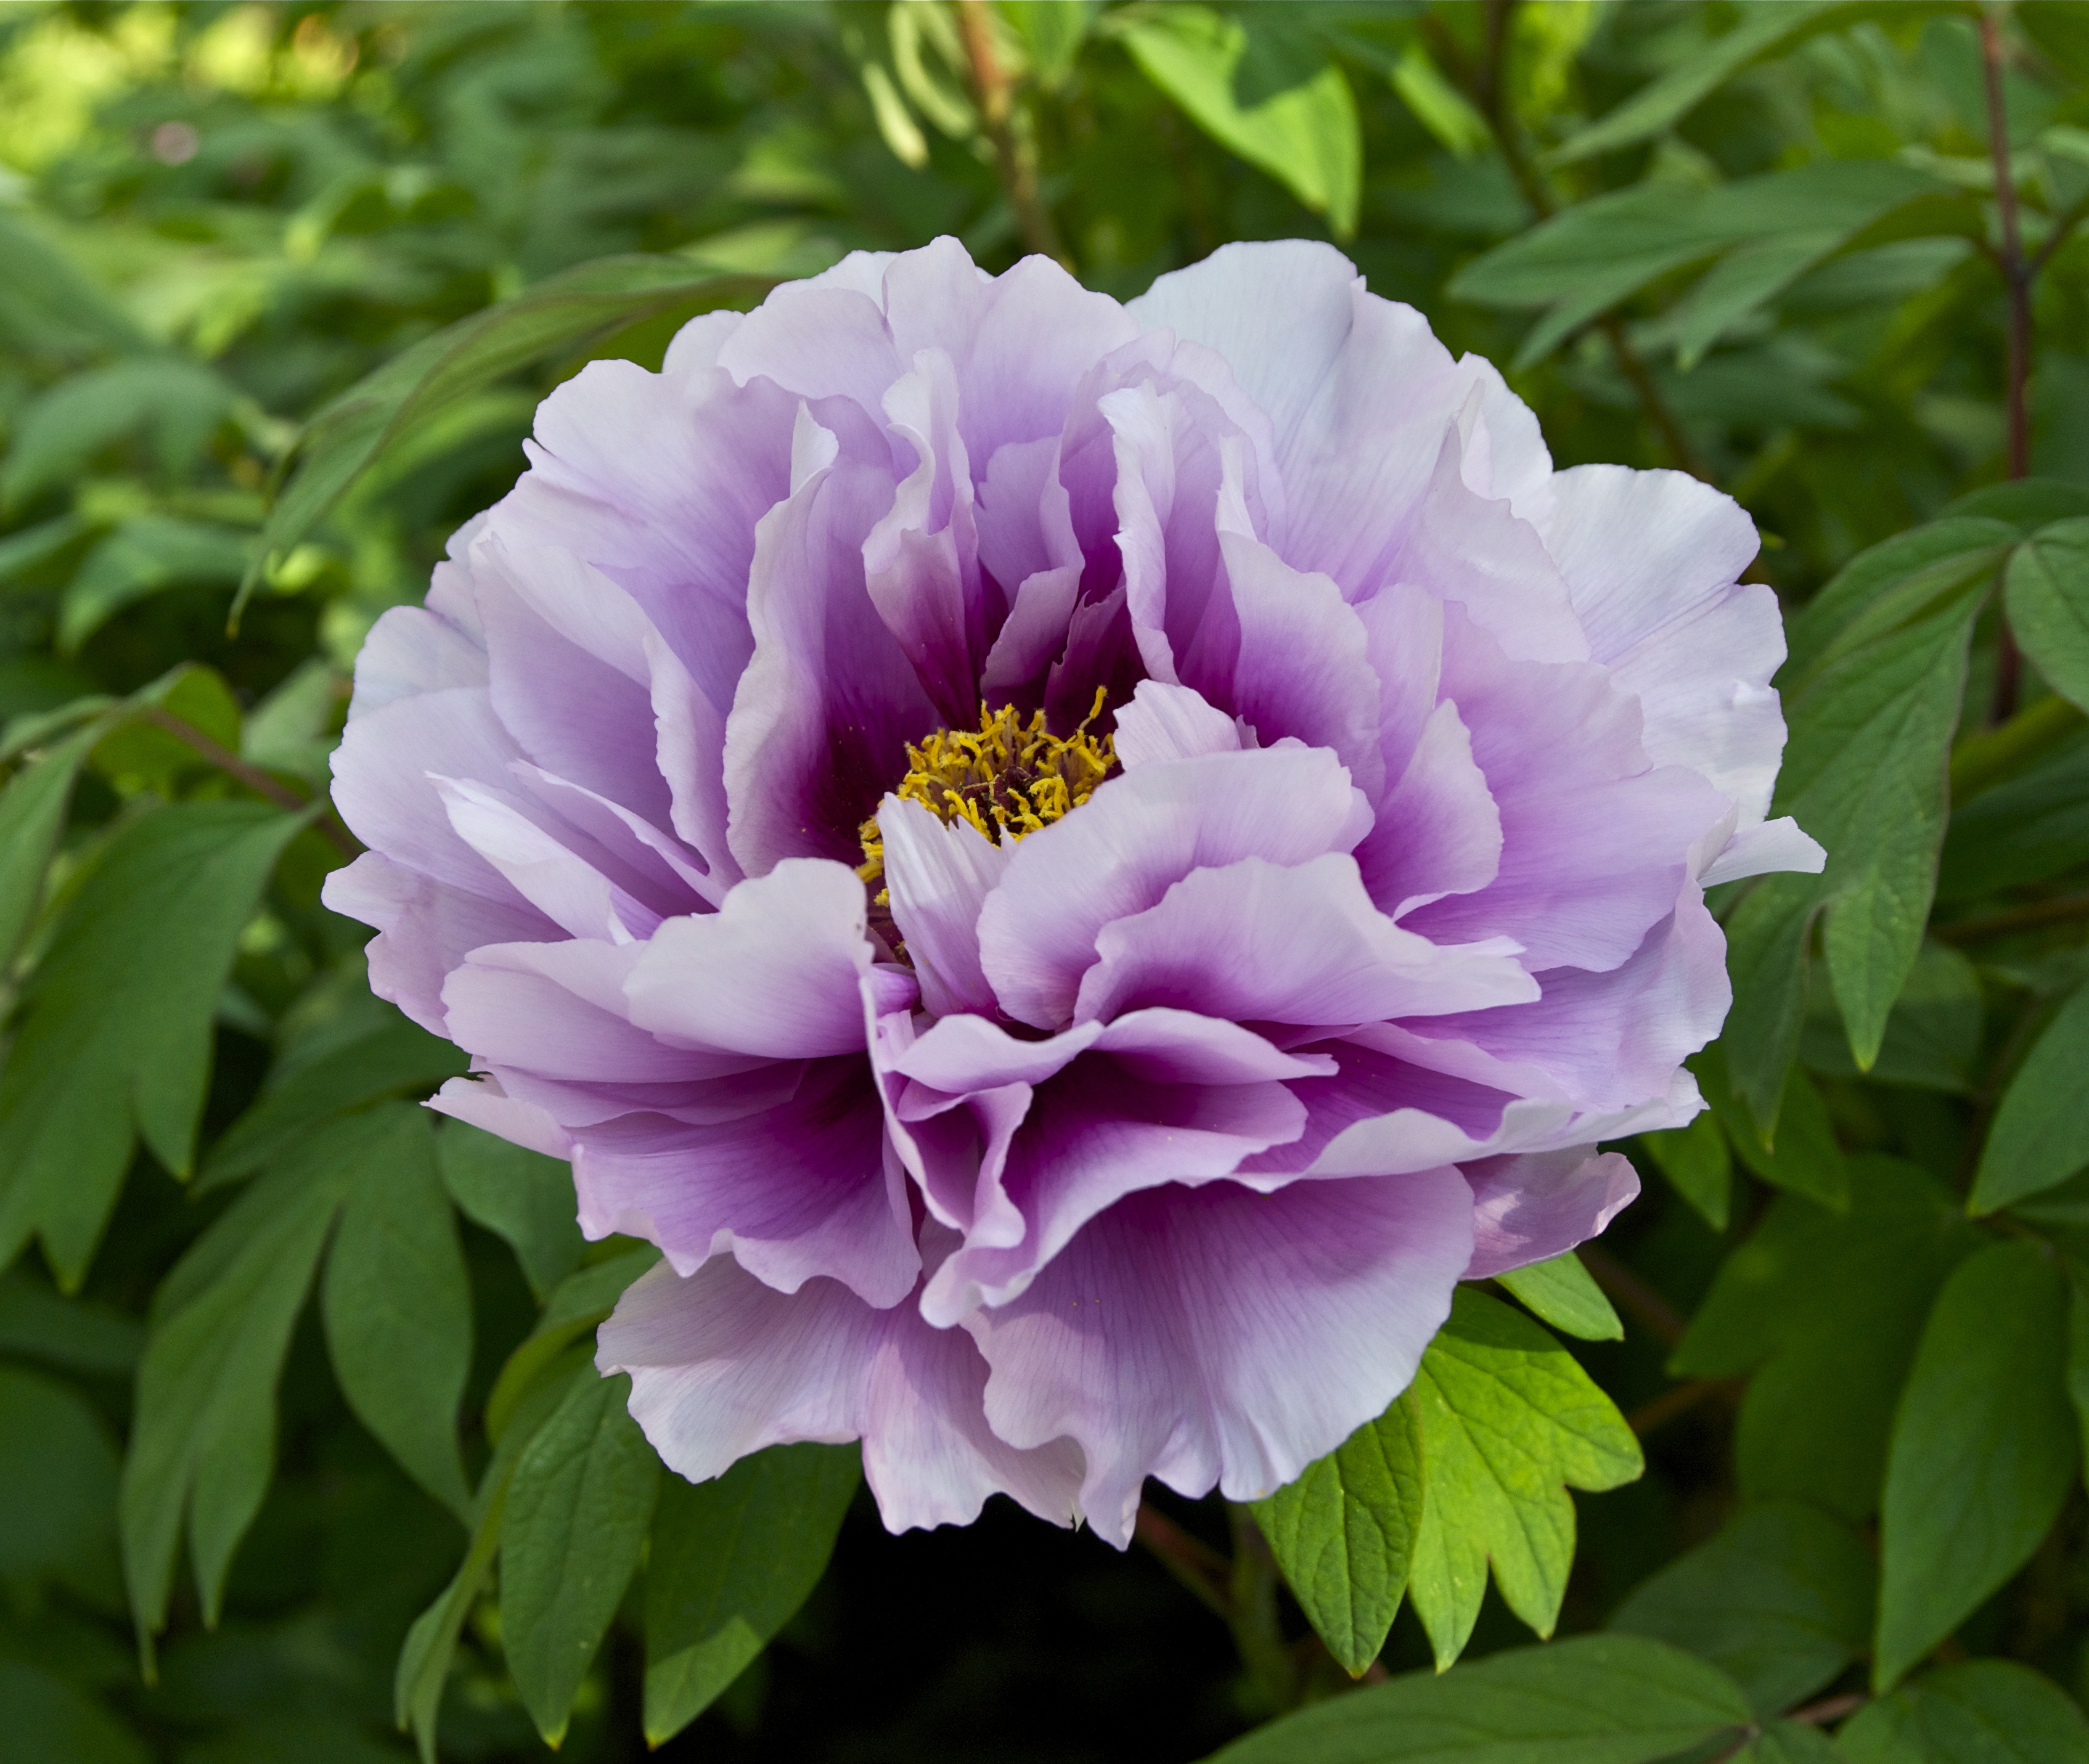 Are Peonies And Other Flowers Poisonous For Dogs Lazy Dog Inn